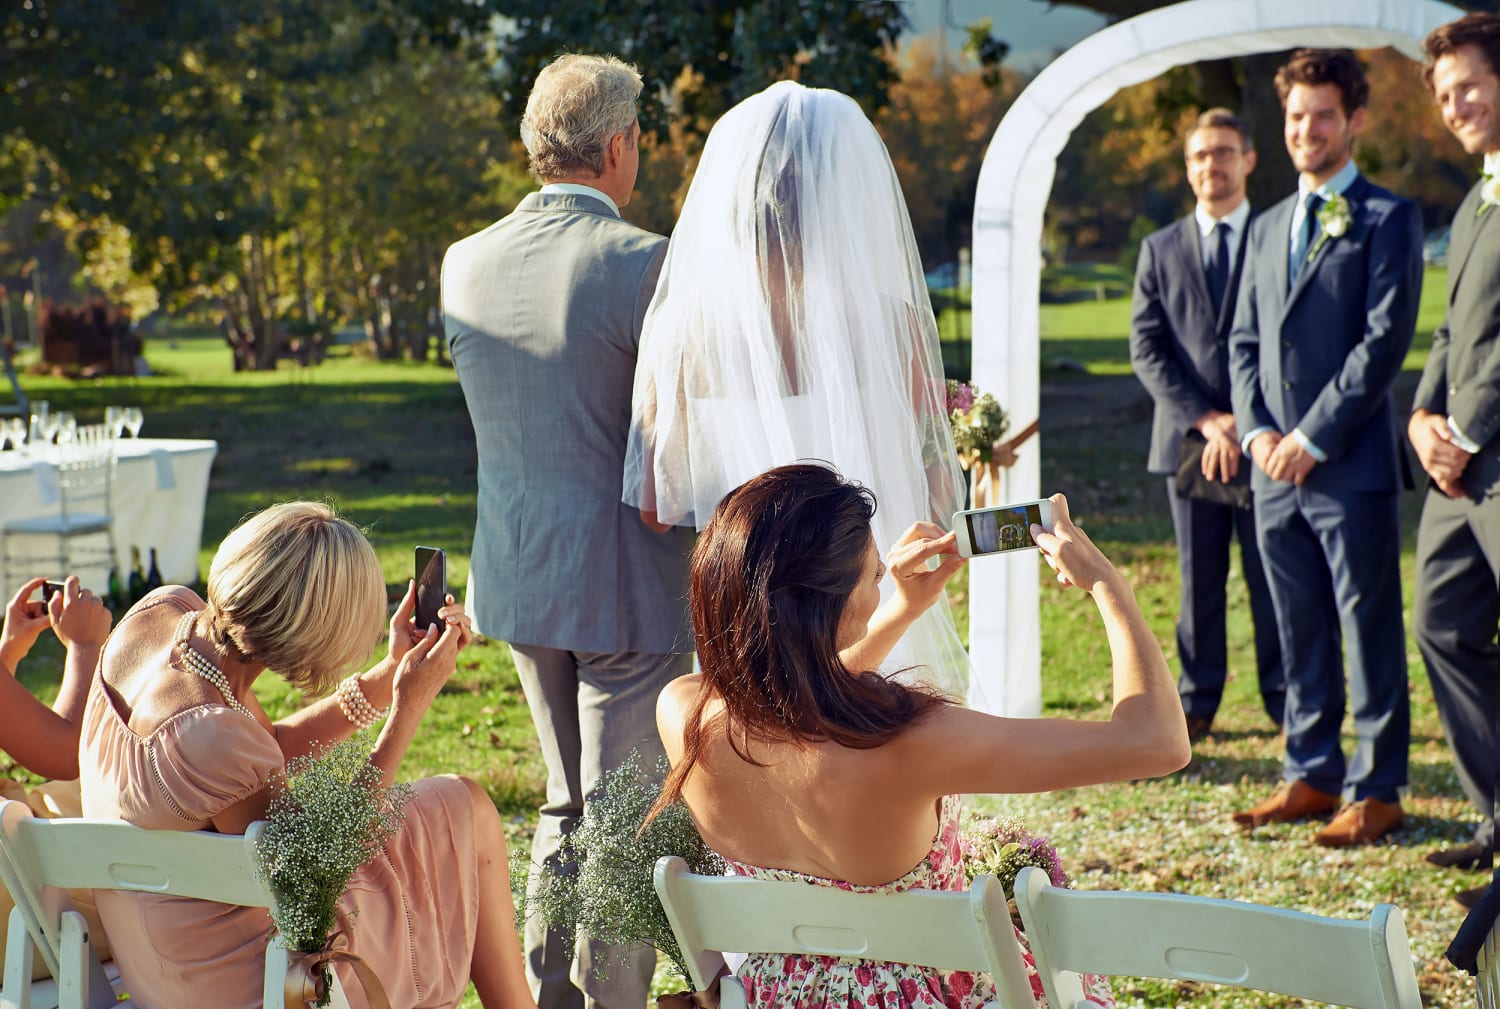 Wedding Expert Shares Things Wedding Party Members Should Never Do